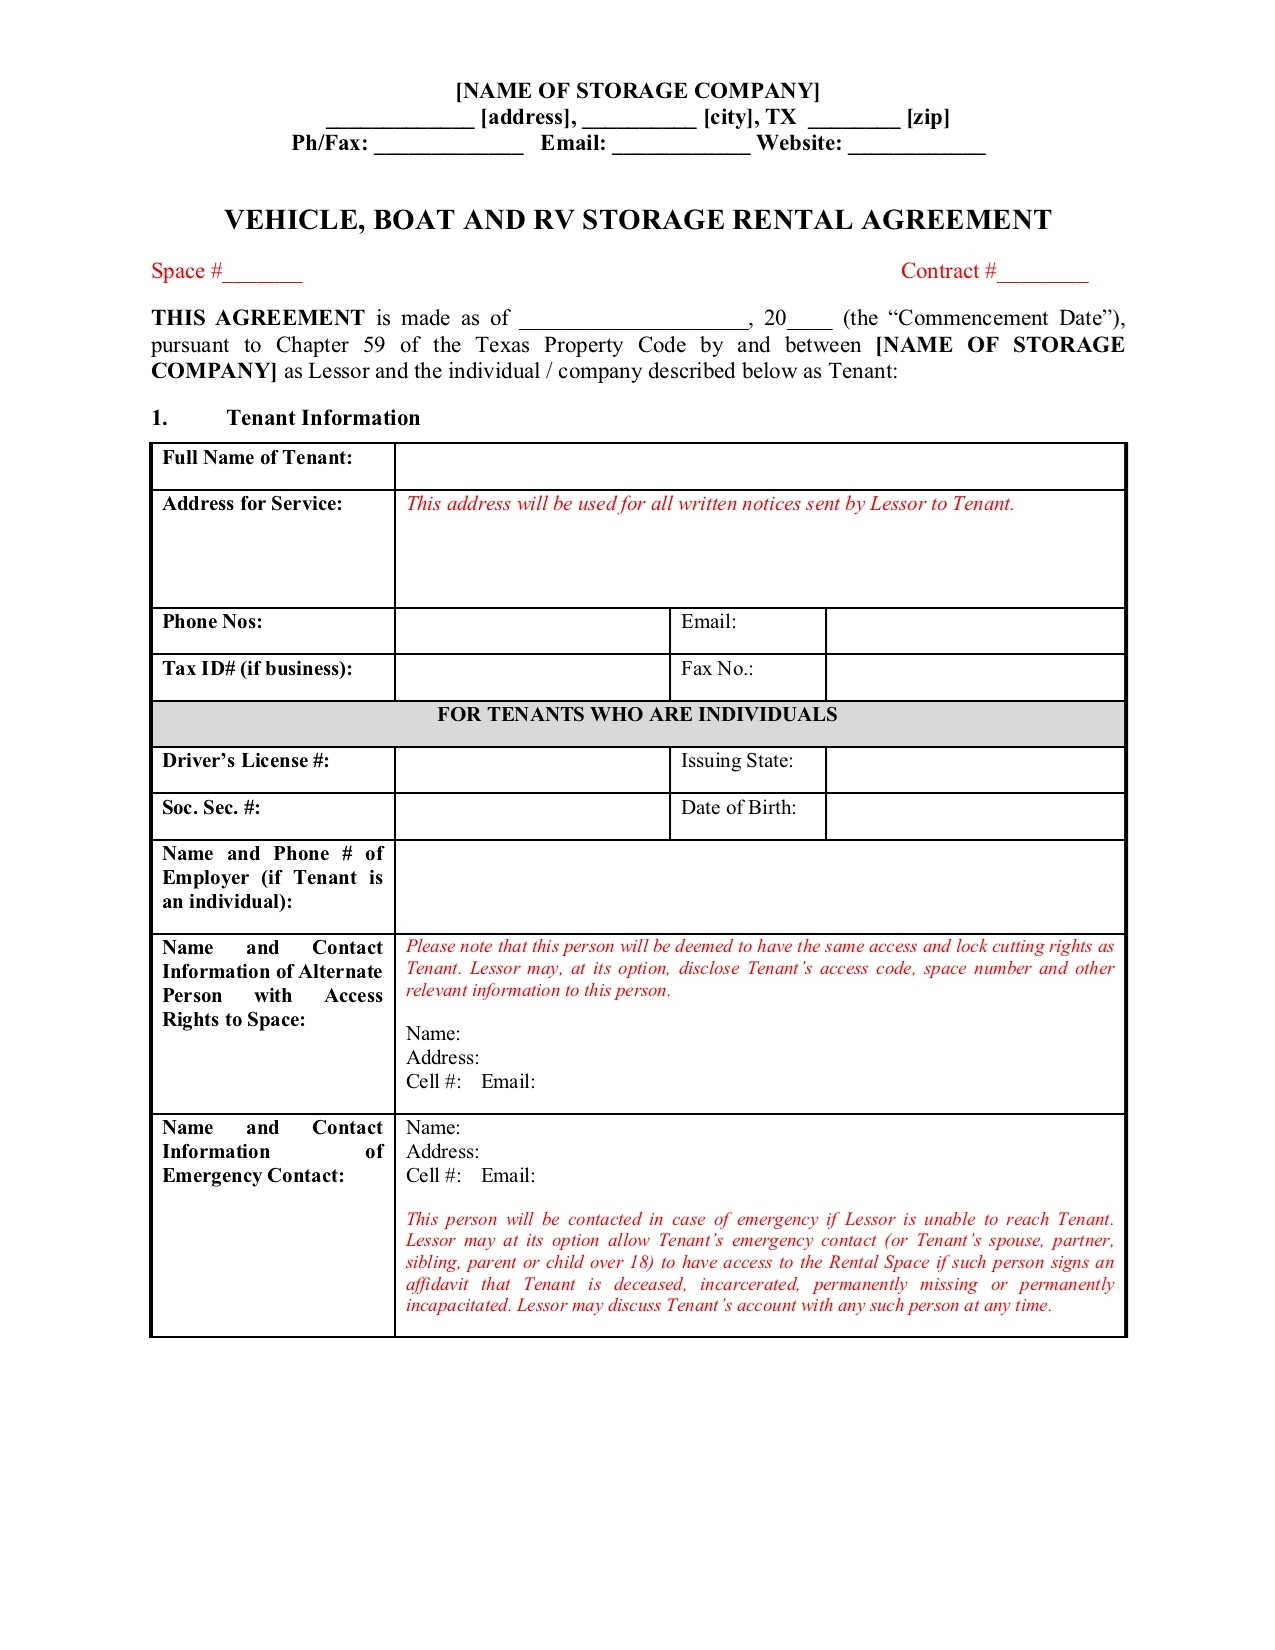 Texas Vehicle Boat And Rv Storage Rental Contract Legal Forms And Business Templates Megadox Com